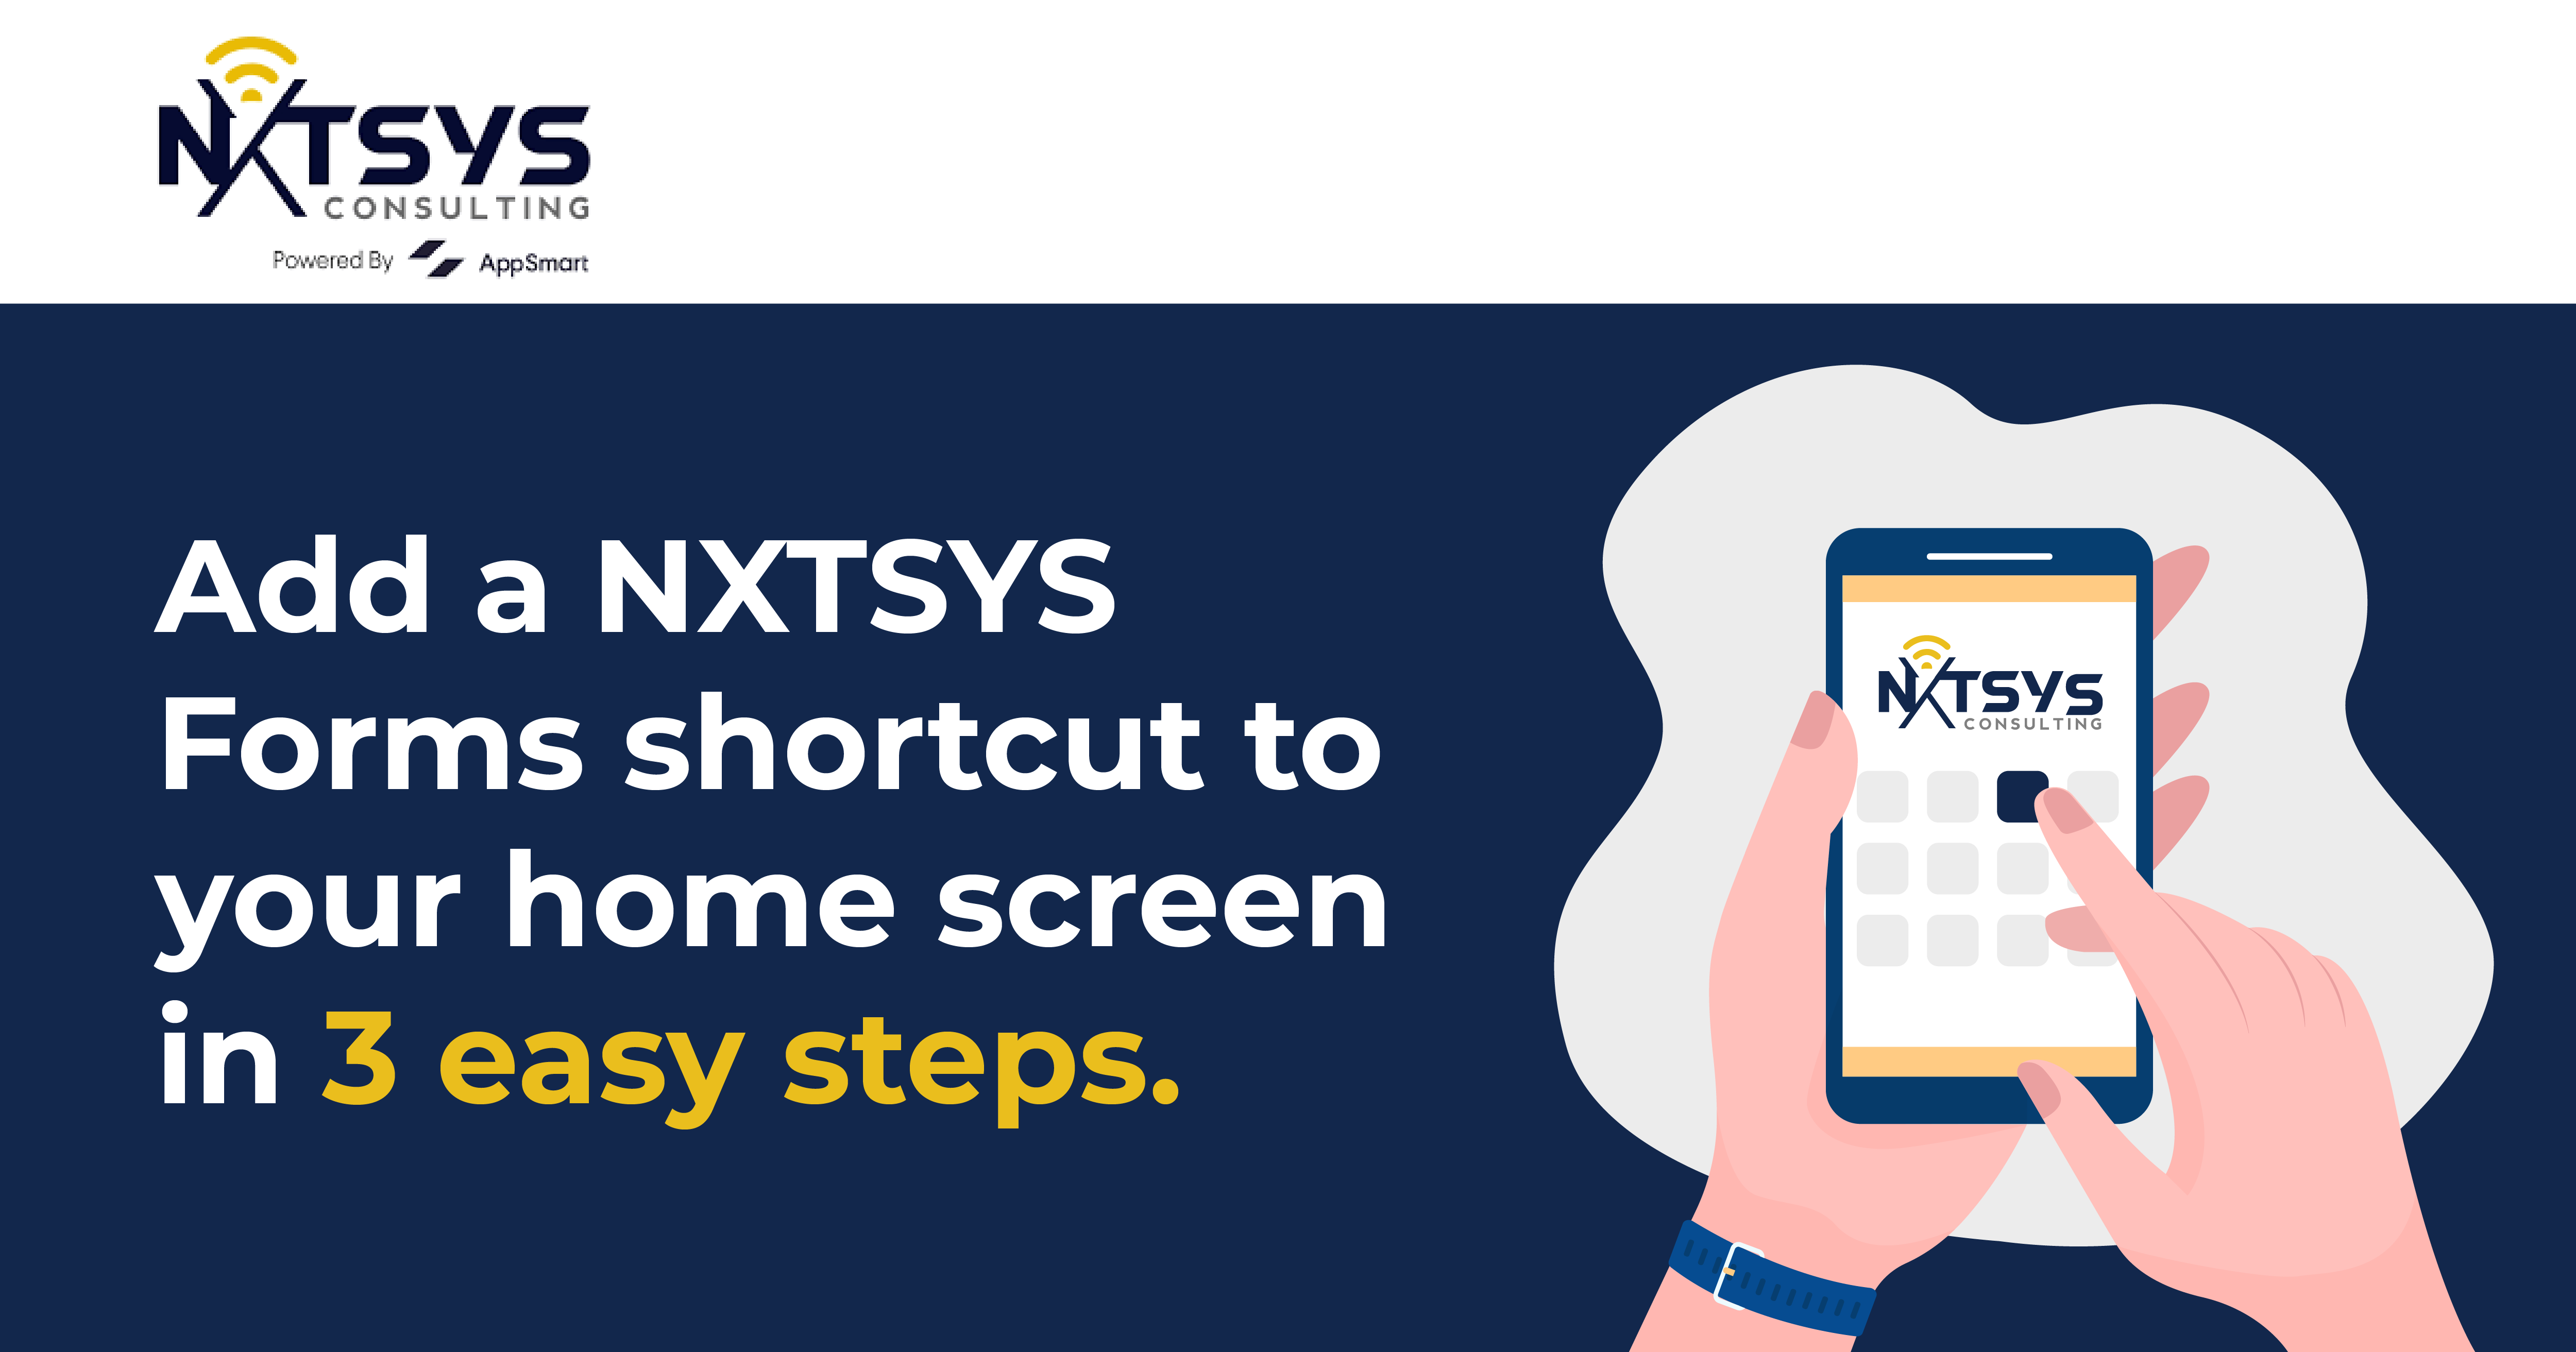 Add a NXTSYS Forms shortcut to your home screen in 3 easy steps.